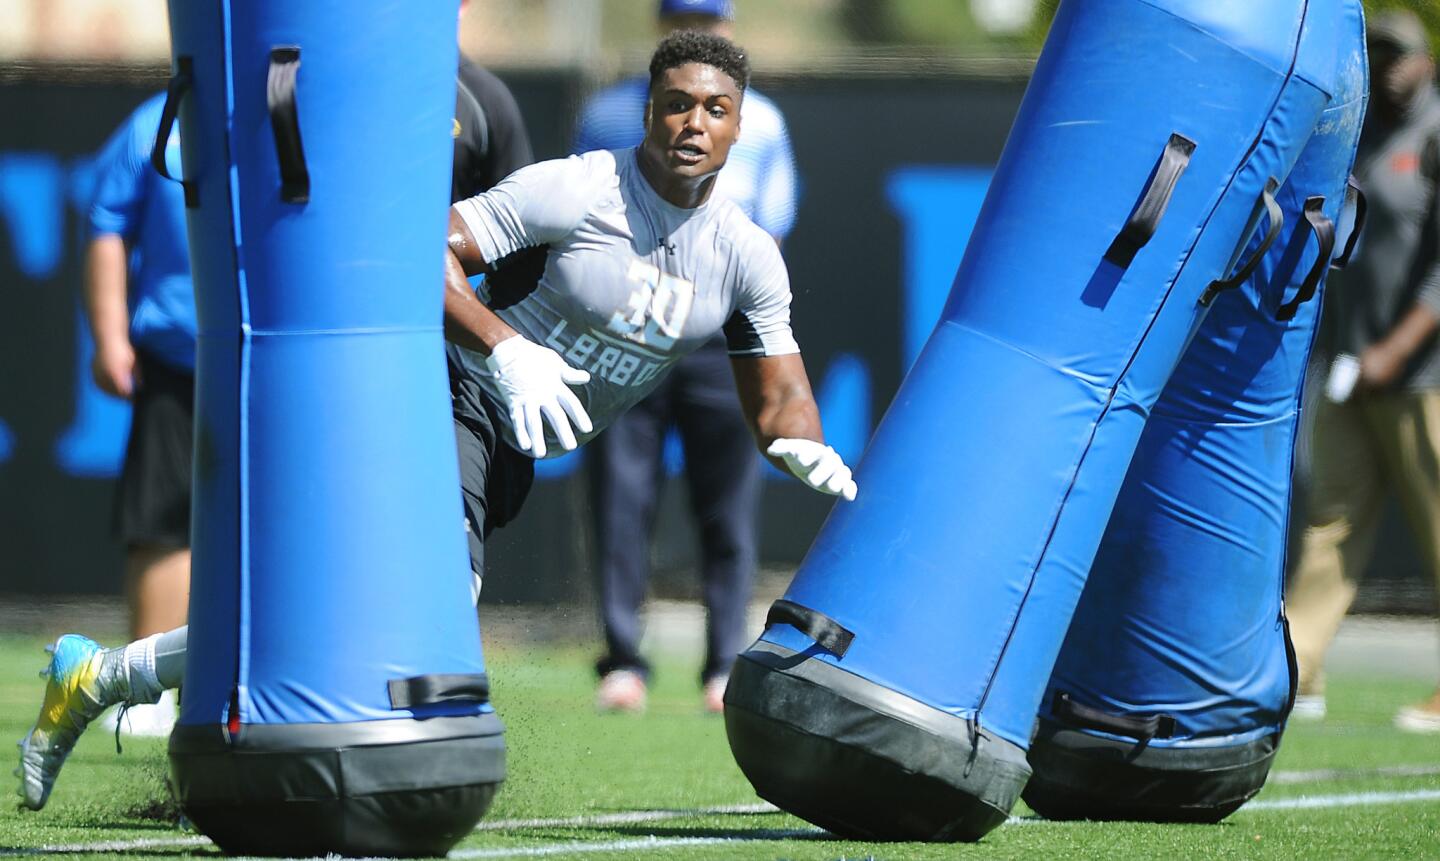 Myles Jack is the star, but there are plenty of other attractions at UCLA's pro day for NFL prospects